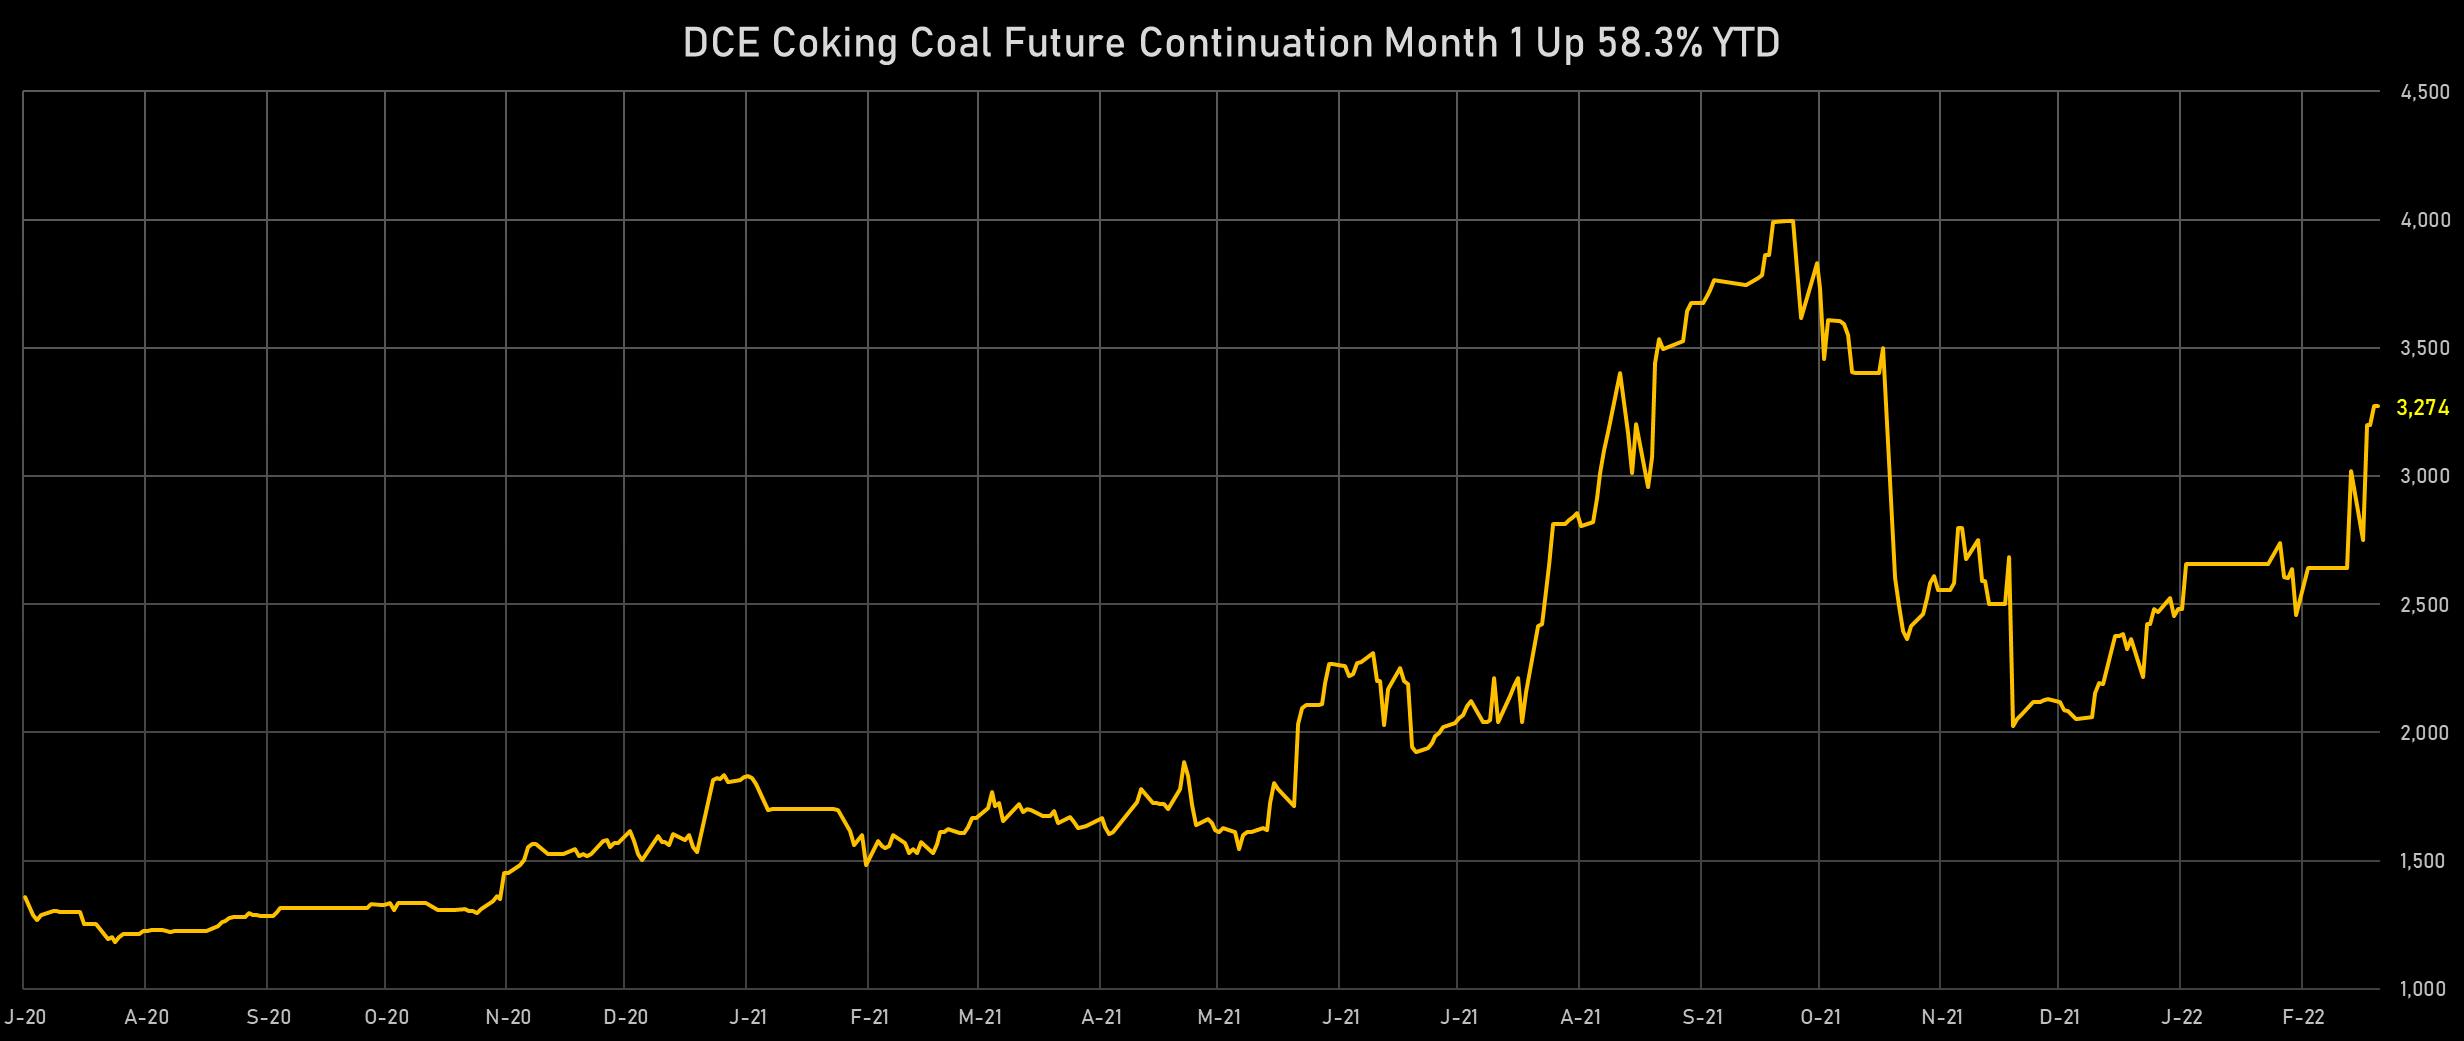 DCE Coking Coal Front Month Futures Prices | Sources: phipost.com, Refinitiv data